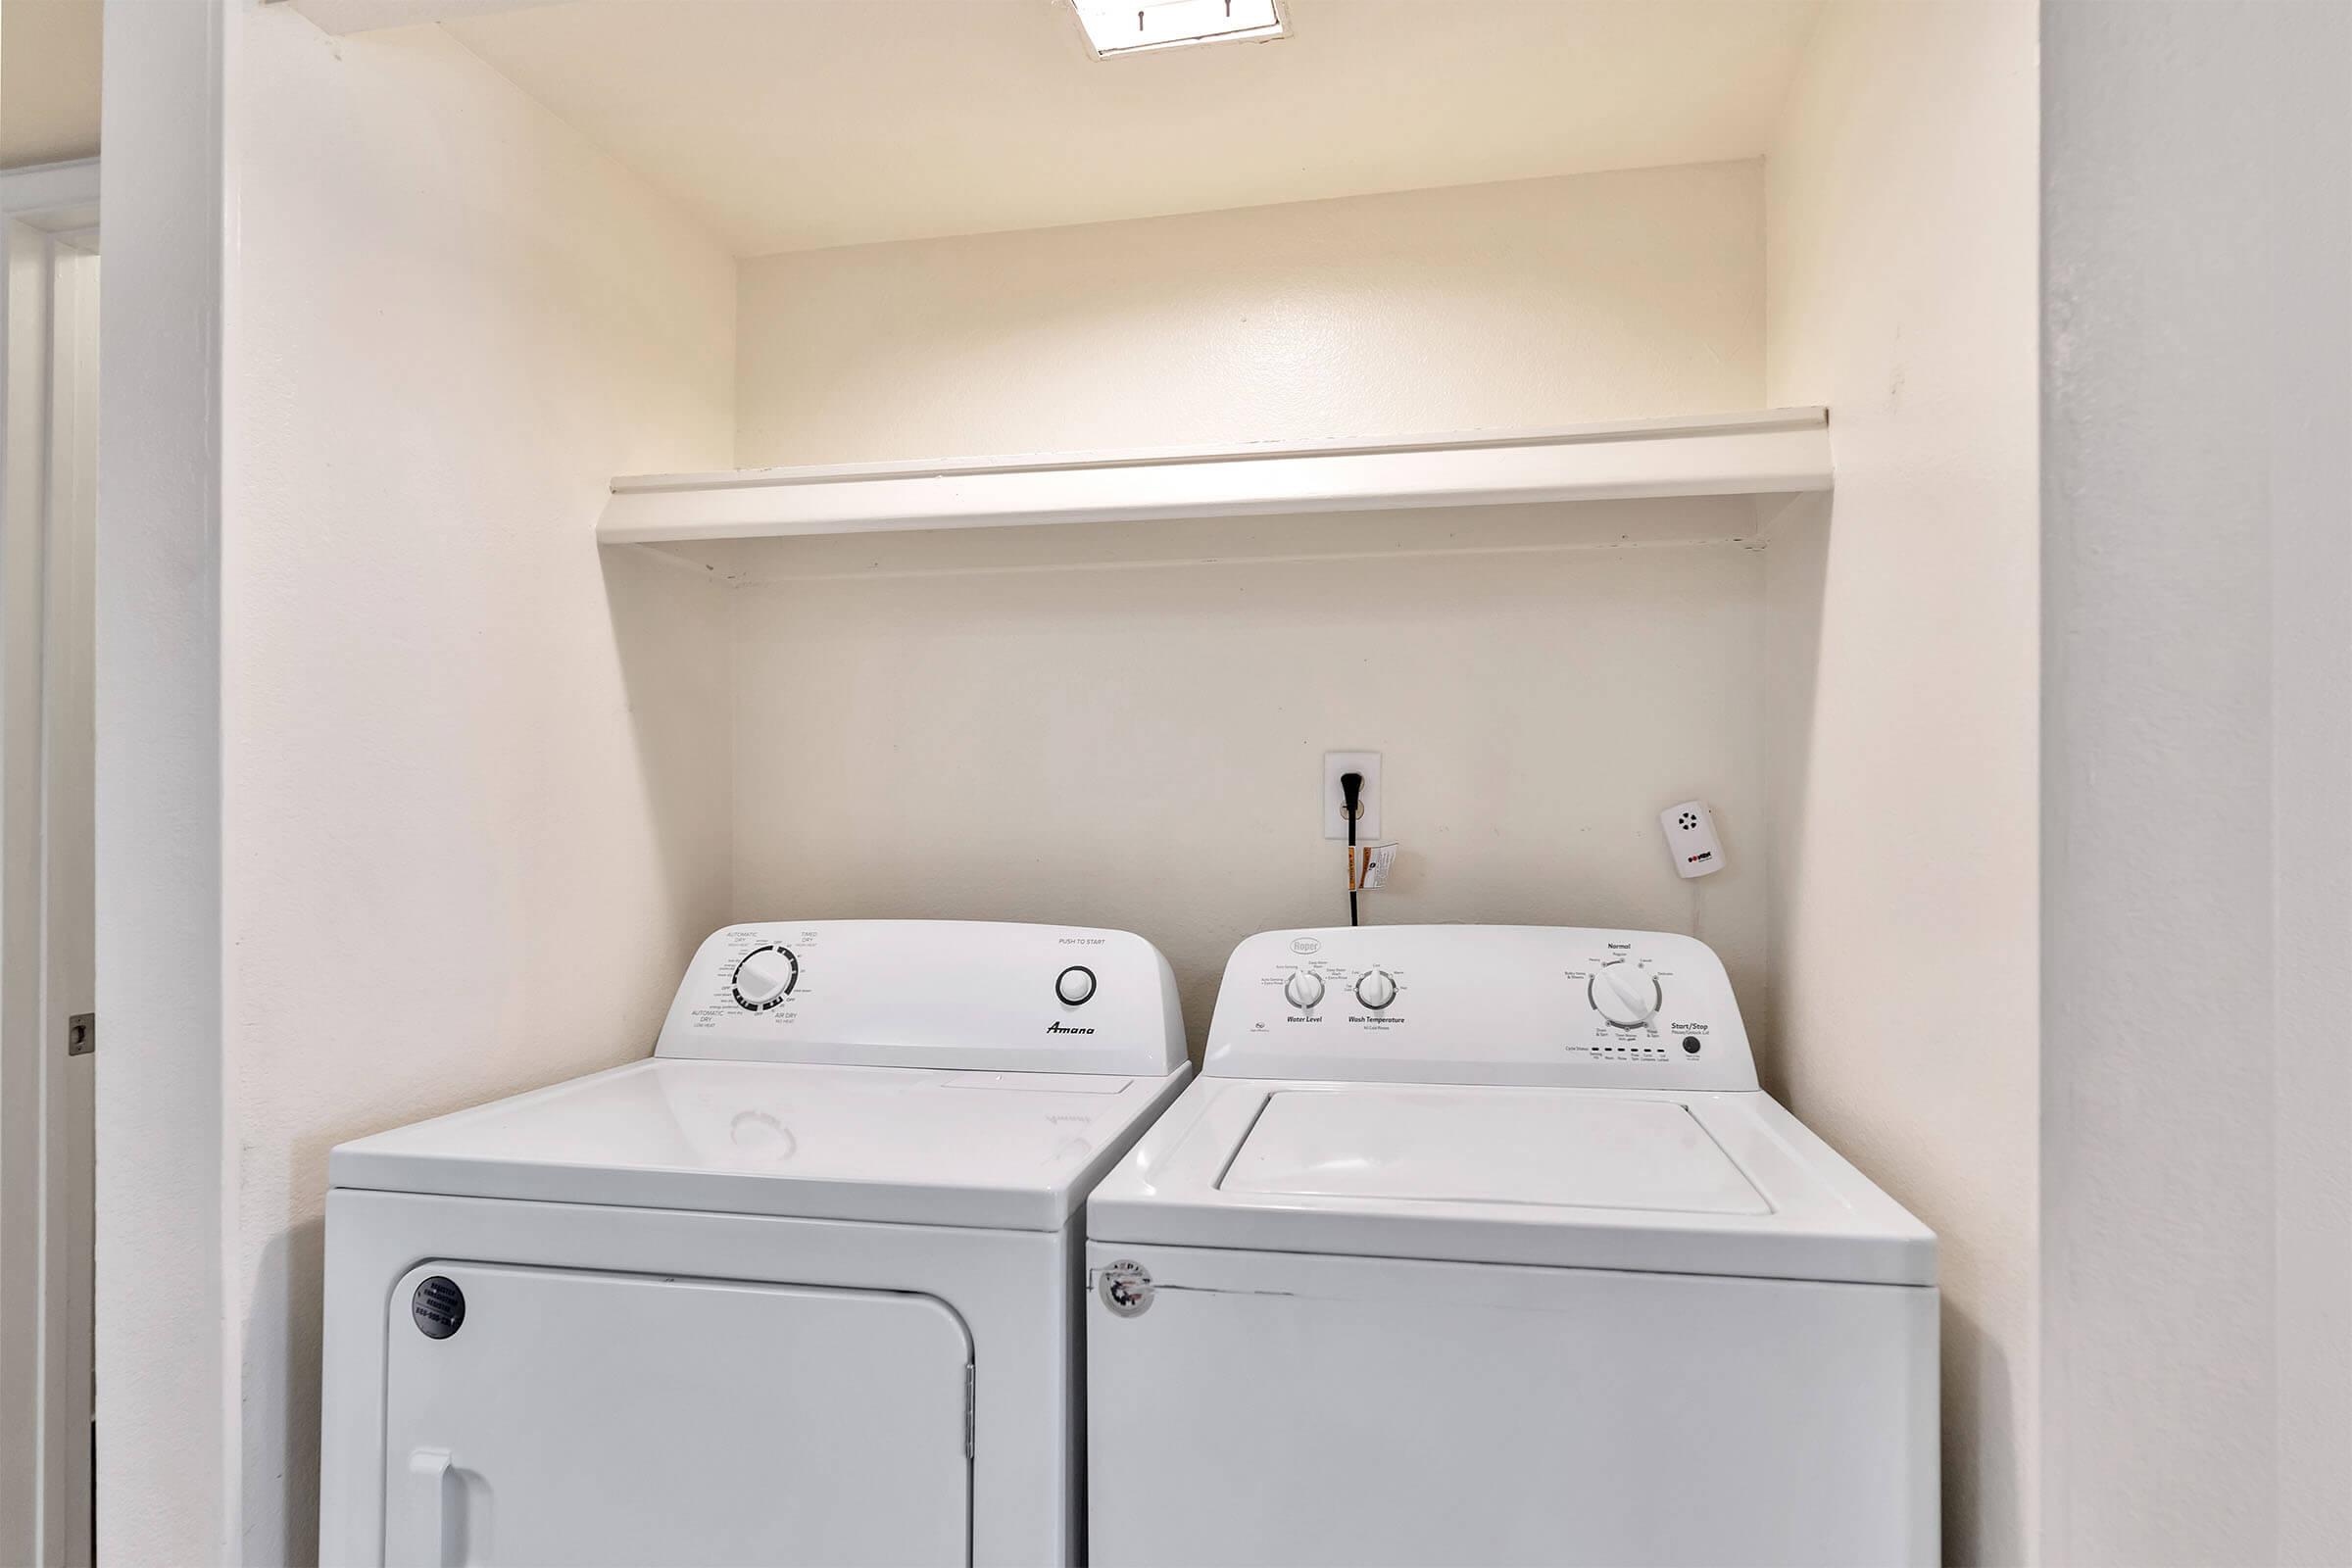 WASHER AND DRYER AVAILABLE